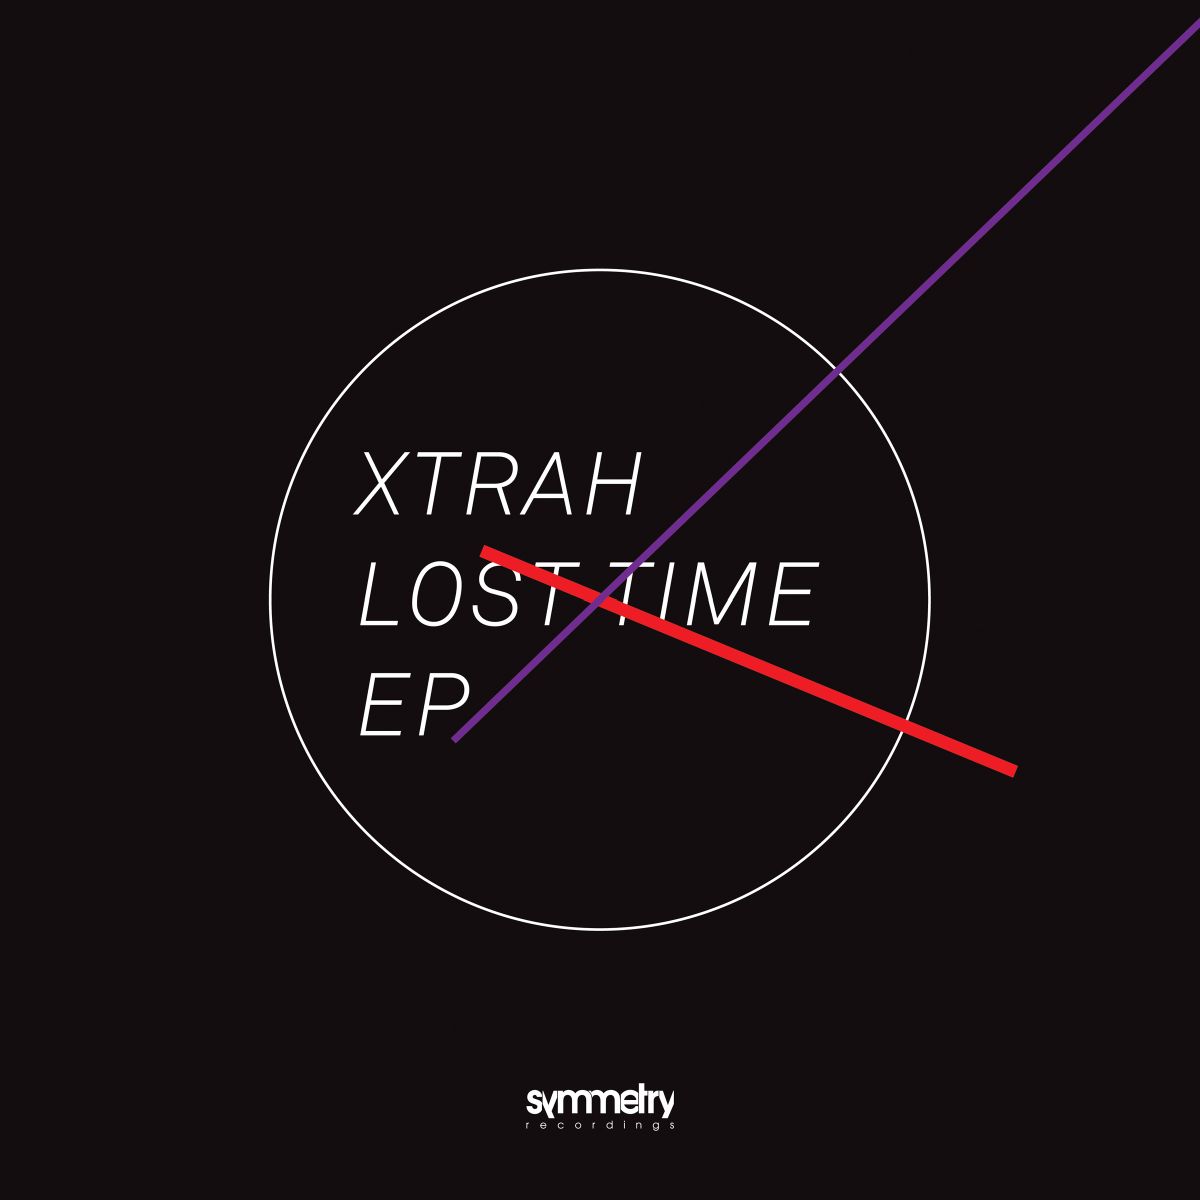 Xtrah/LOST TIME EP 12"